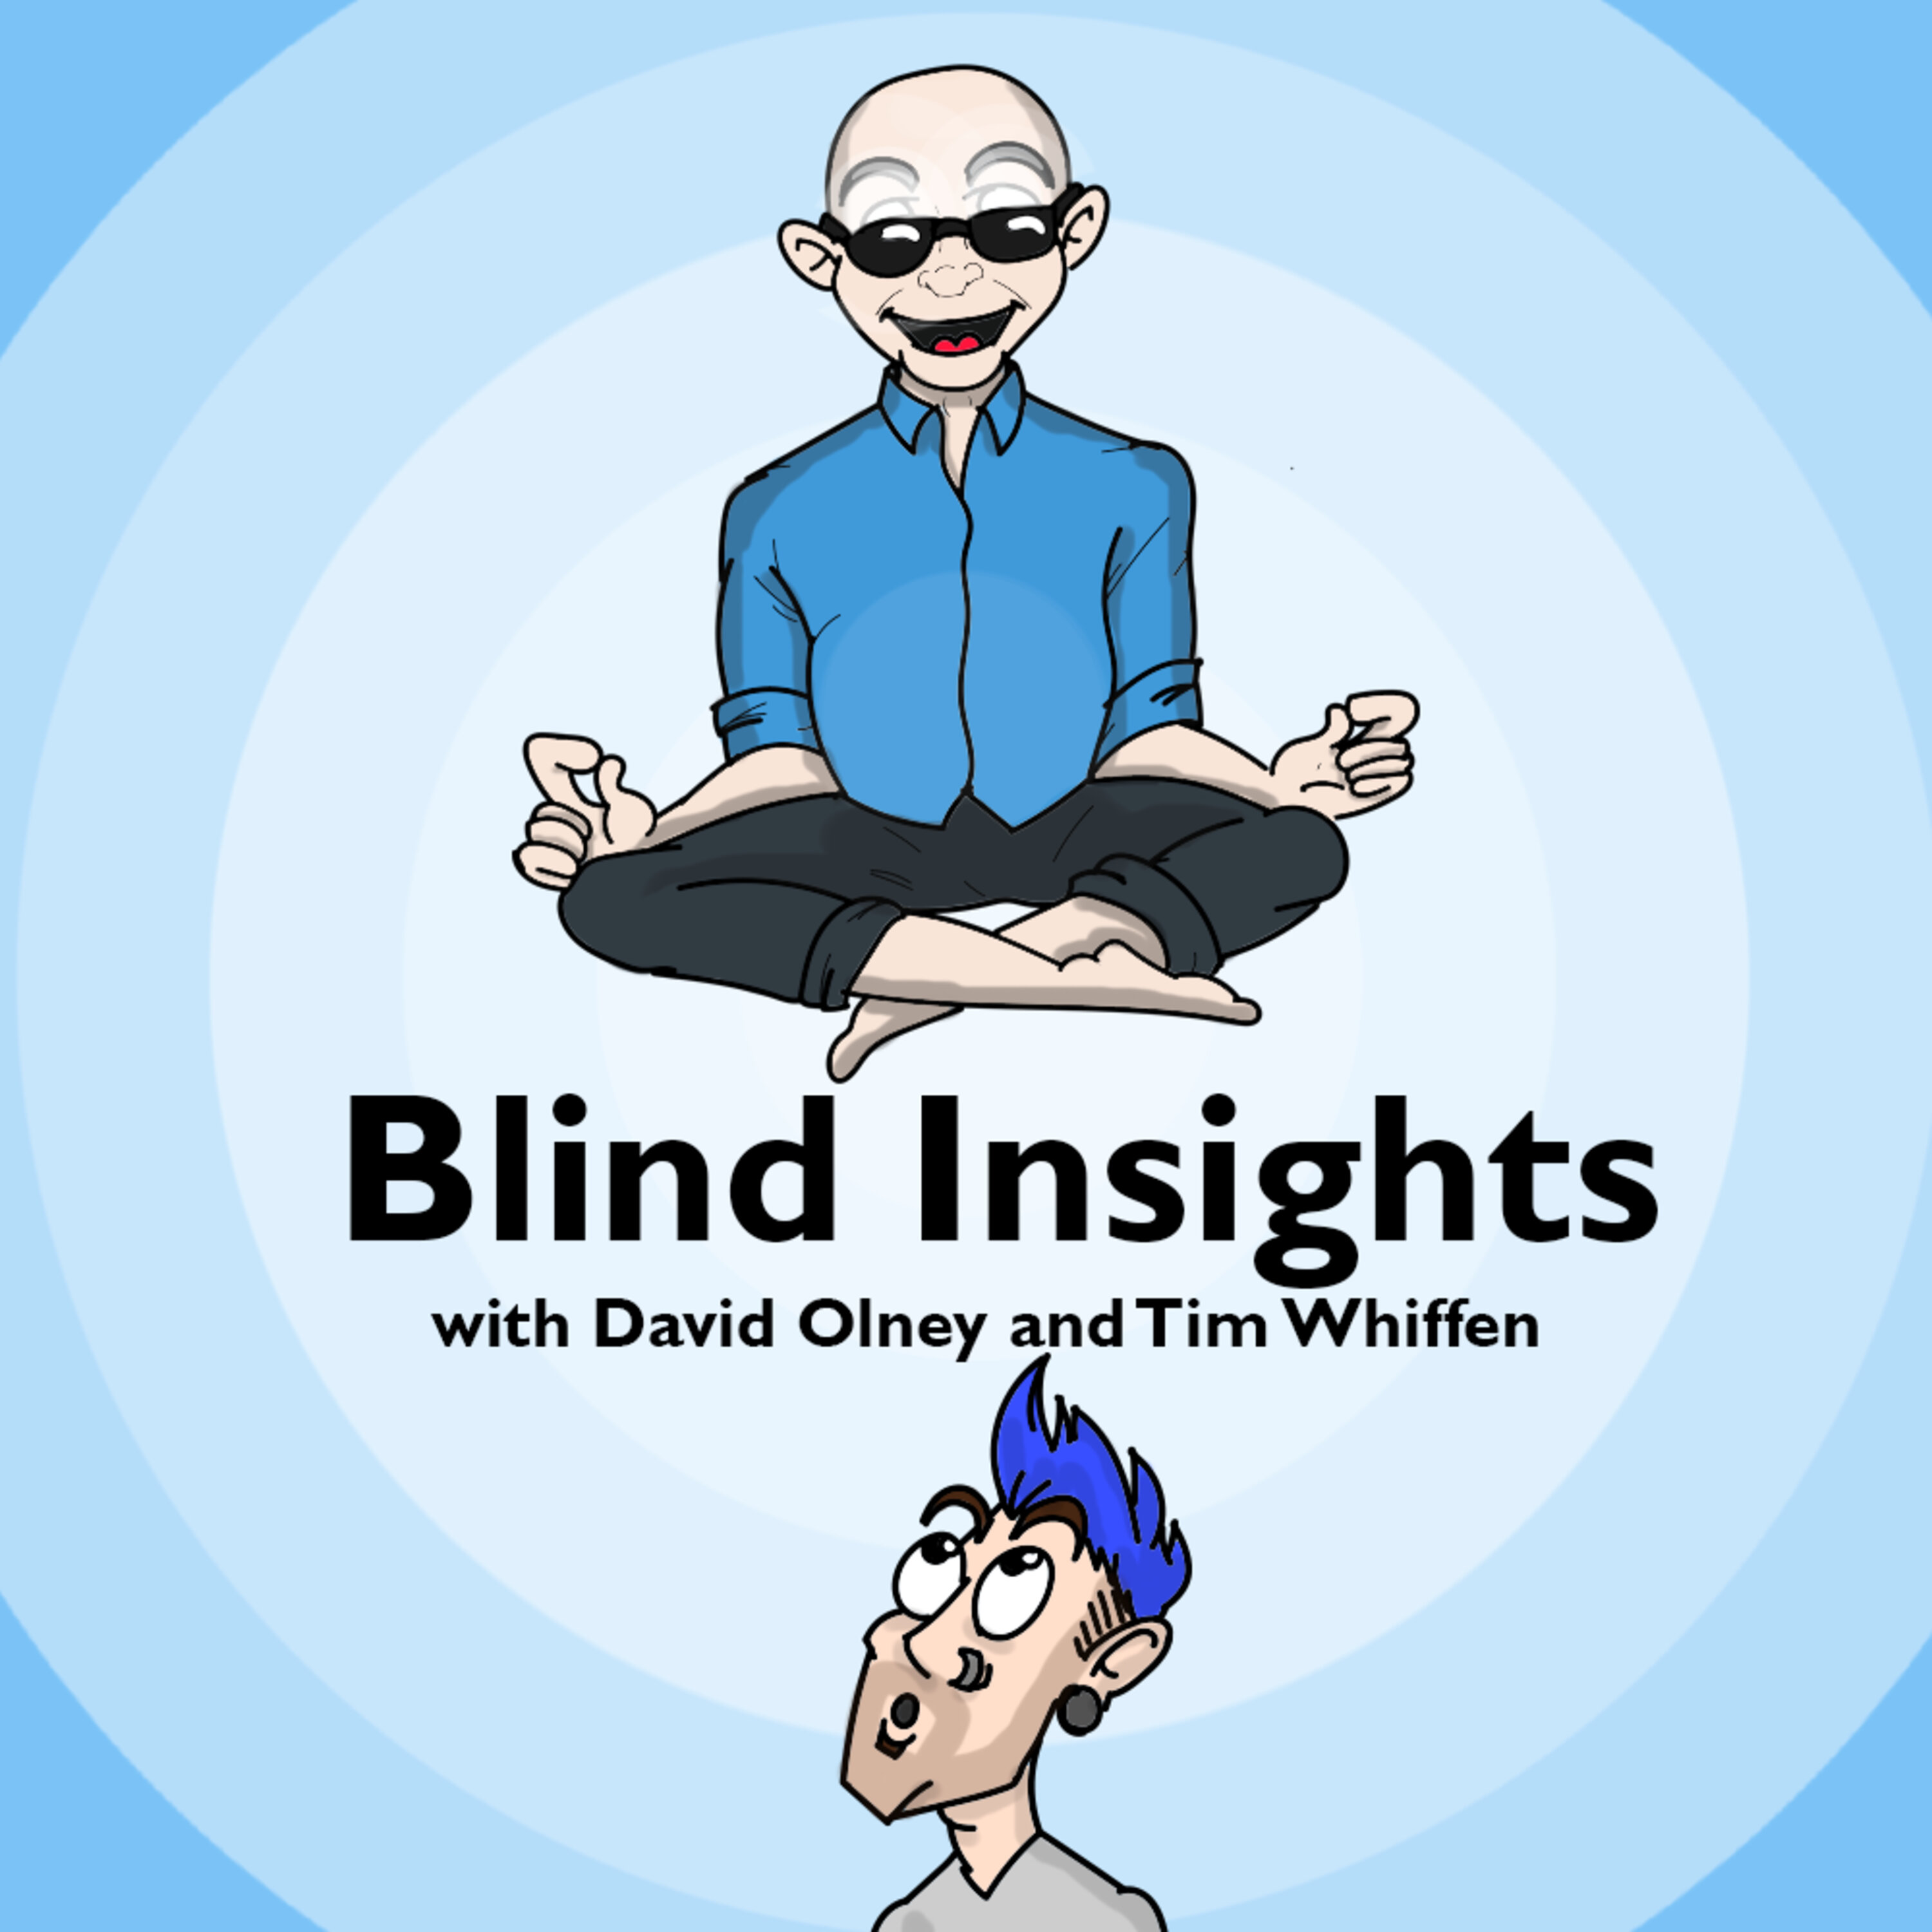 Blind Insights - How to Learn